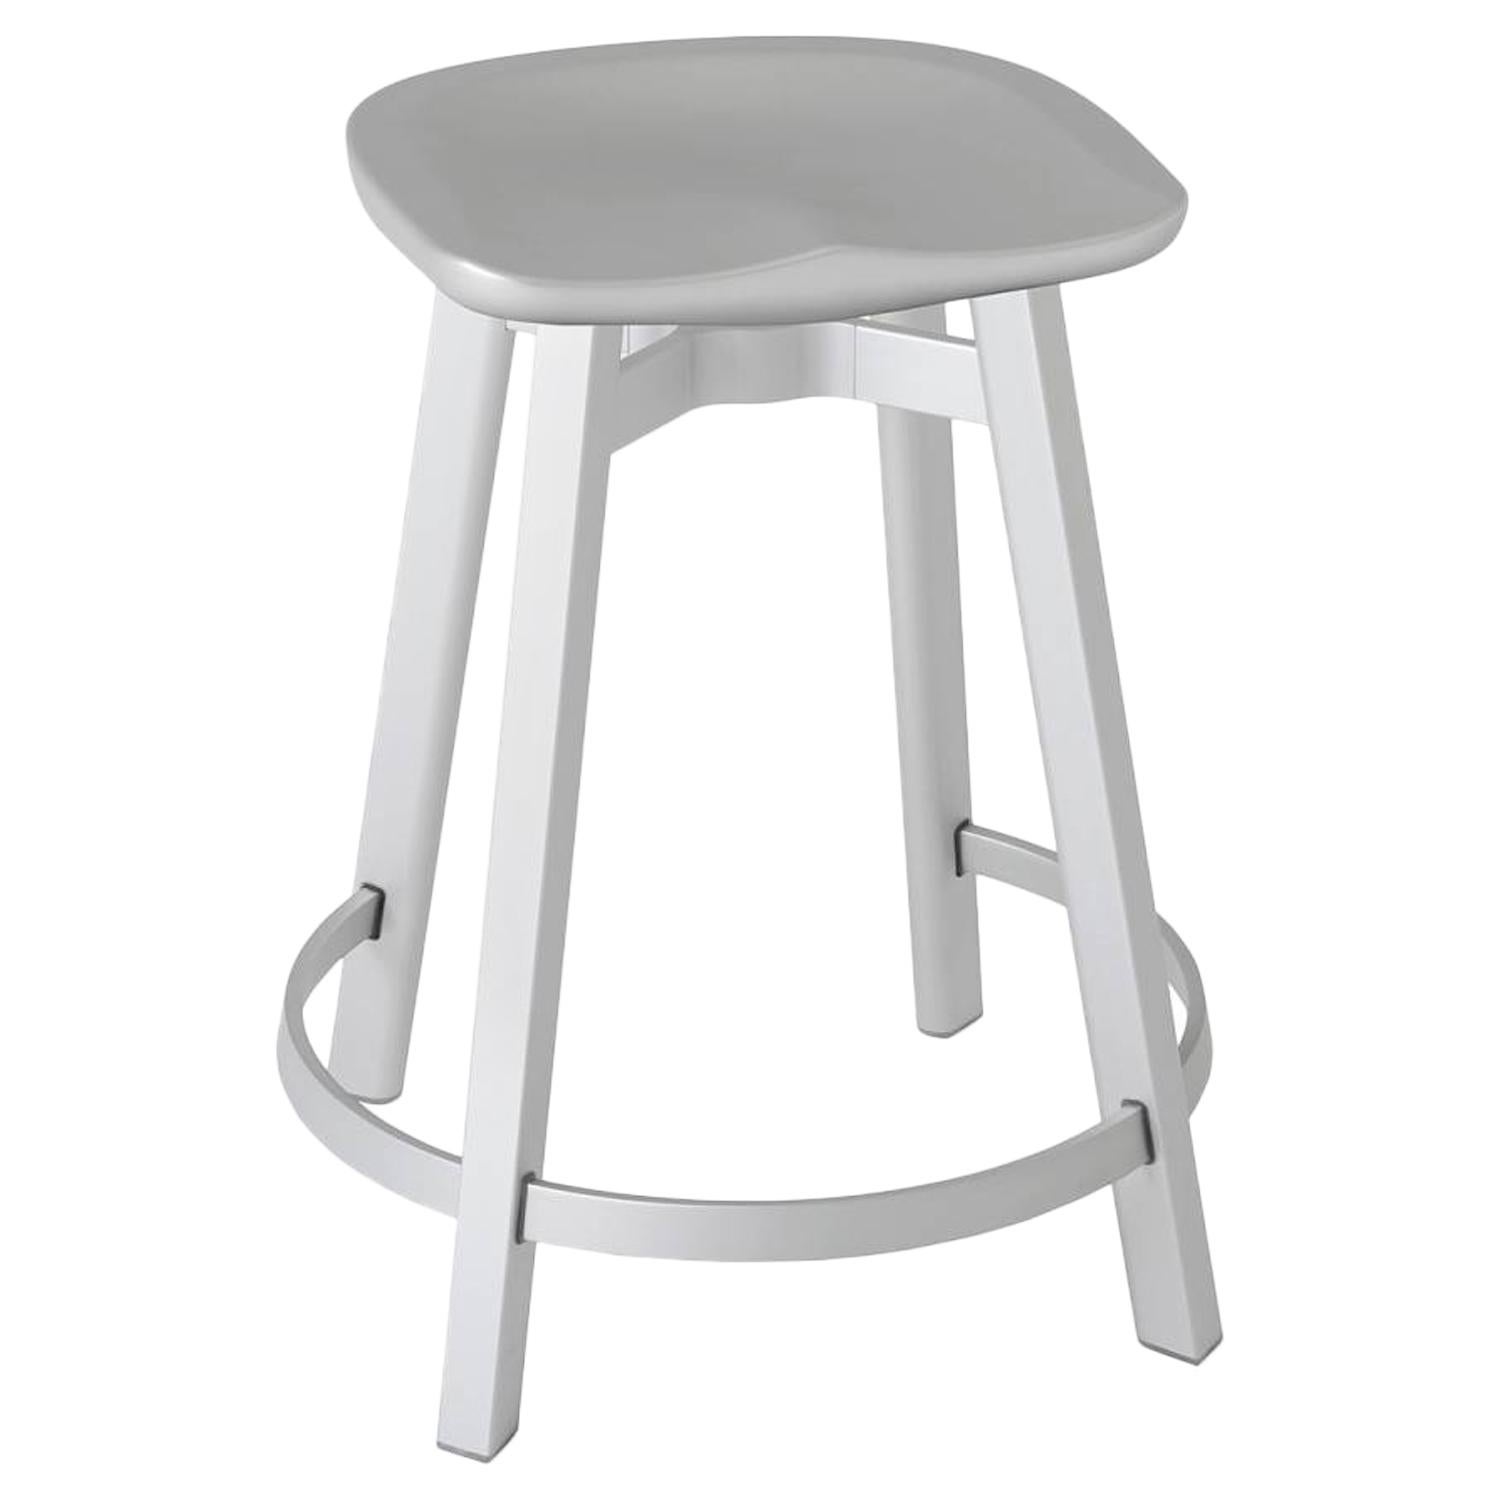 Emeco Su Counter Stool in Natural Aluminum w/ Flint Seat by Nendo